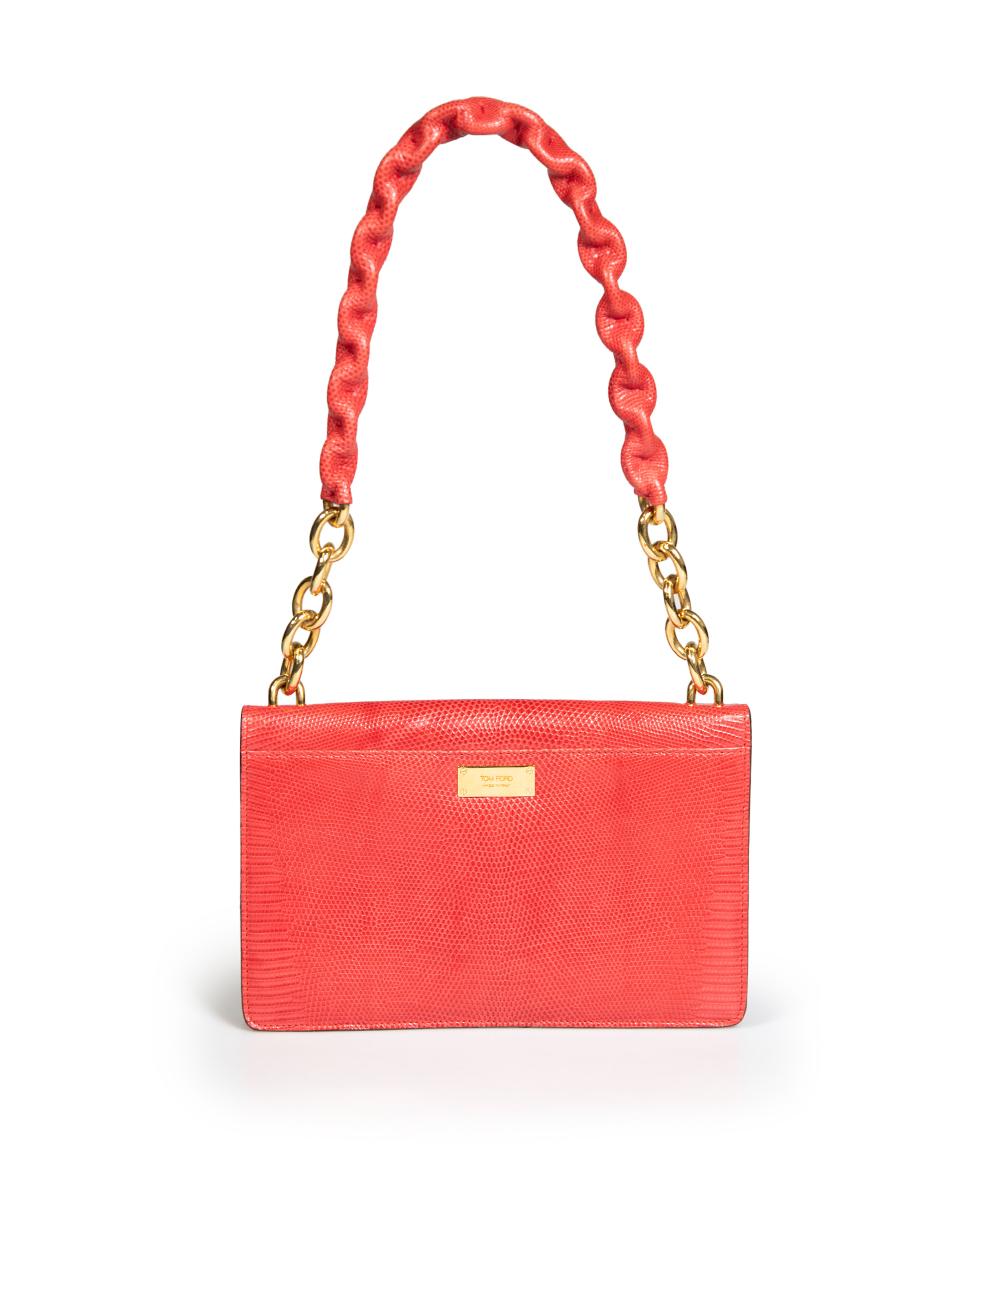 Tom Ford Red Leather Lizard Embossed Buckle Detail Shoulder Bag In Good Condition For Sale In London, GB